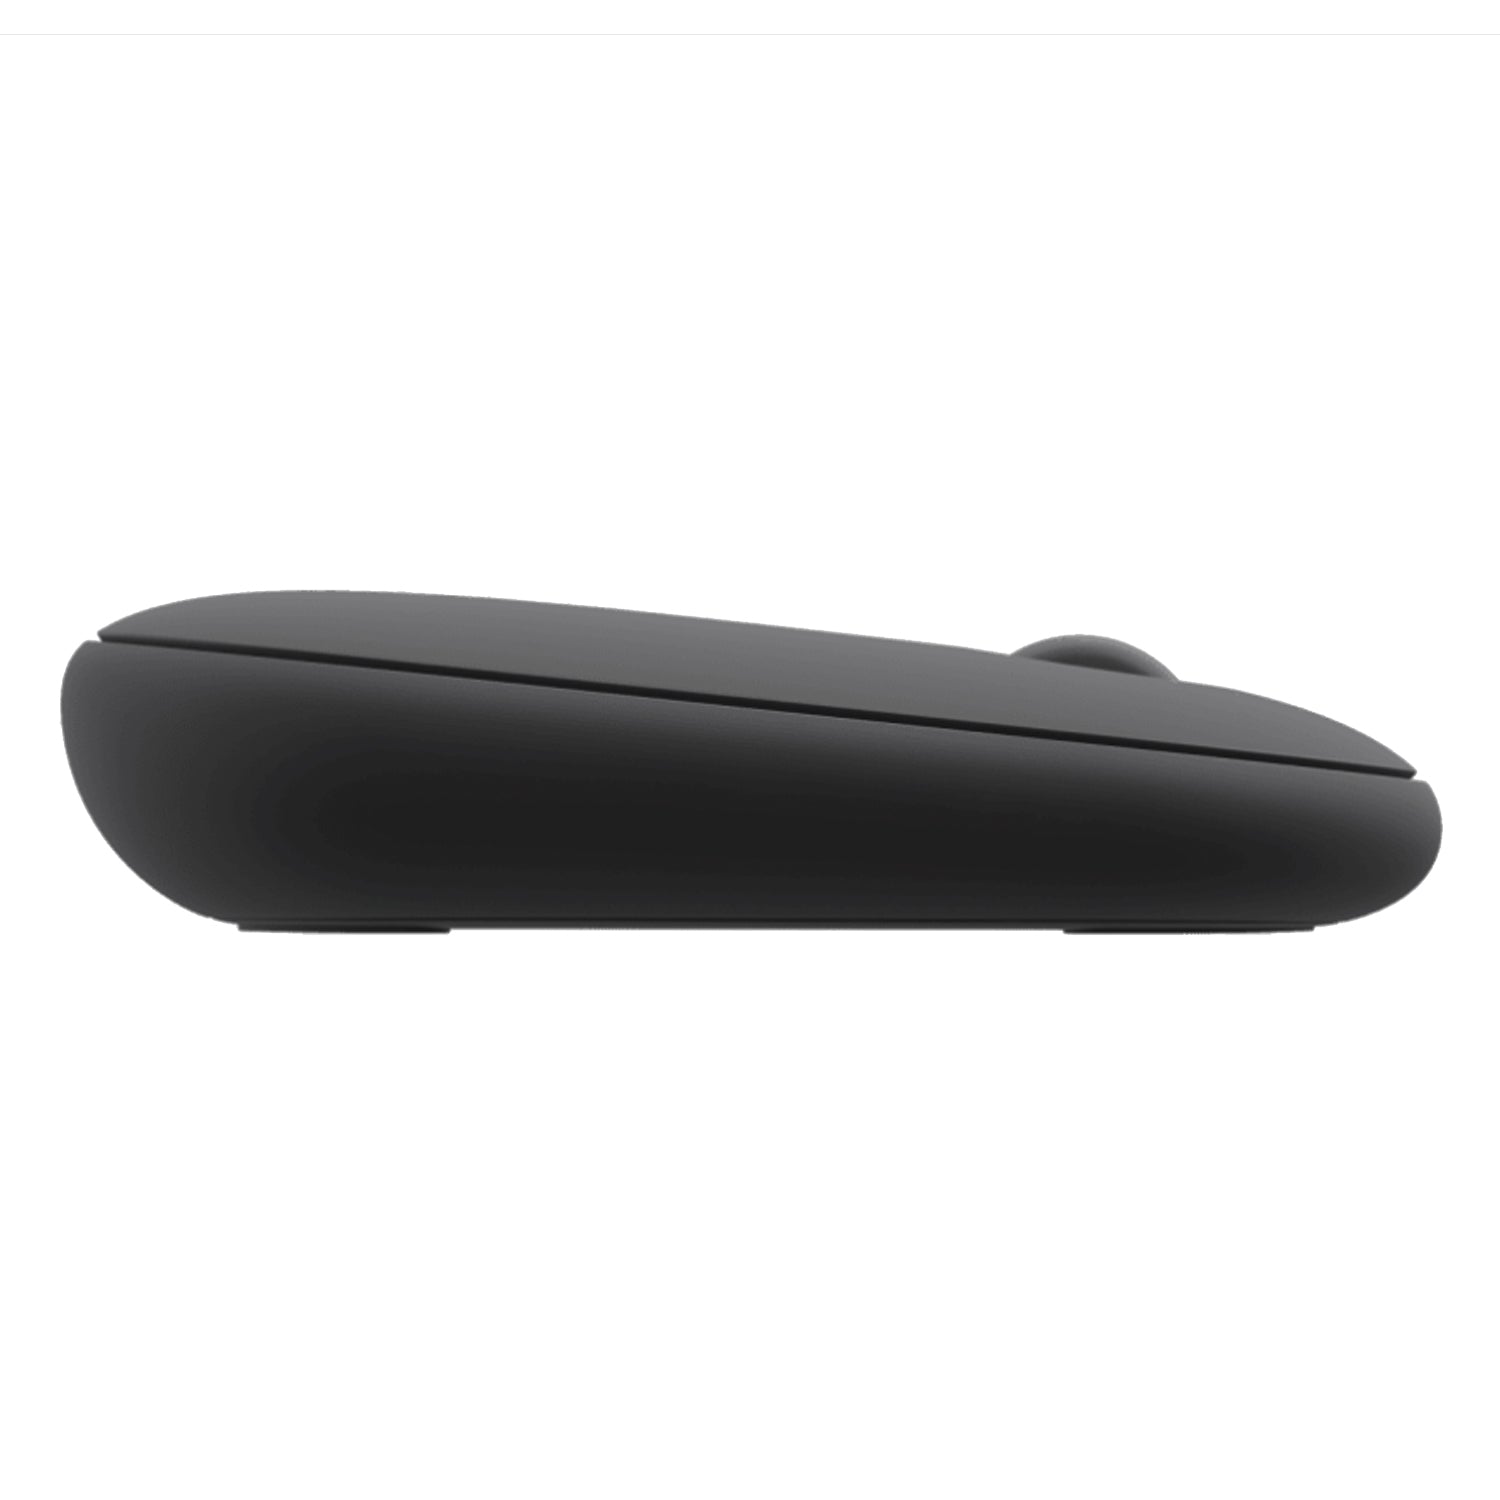 Logitech Pebble Mouse 2 M350S Slim, Compact Bluetooth Mouse with Customizable Button